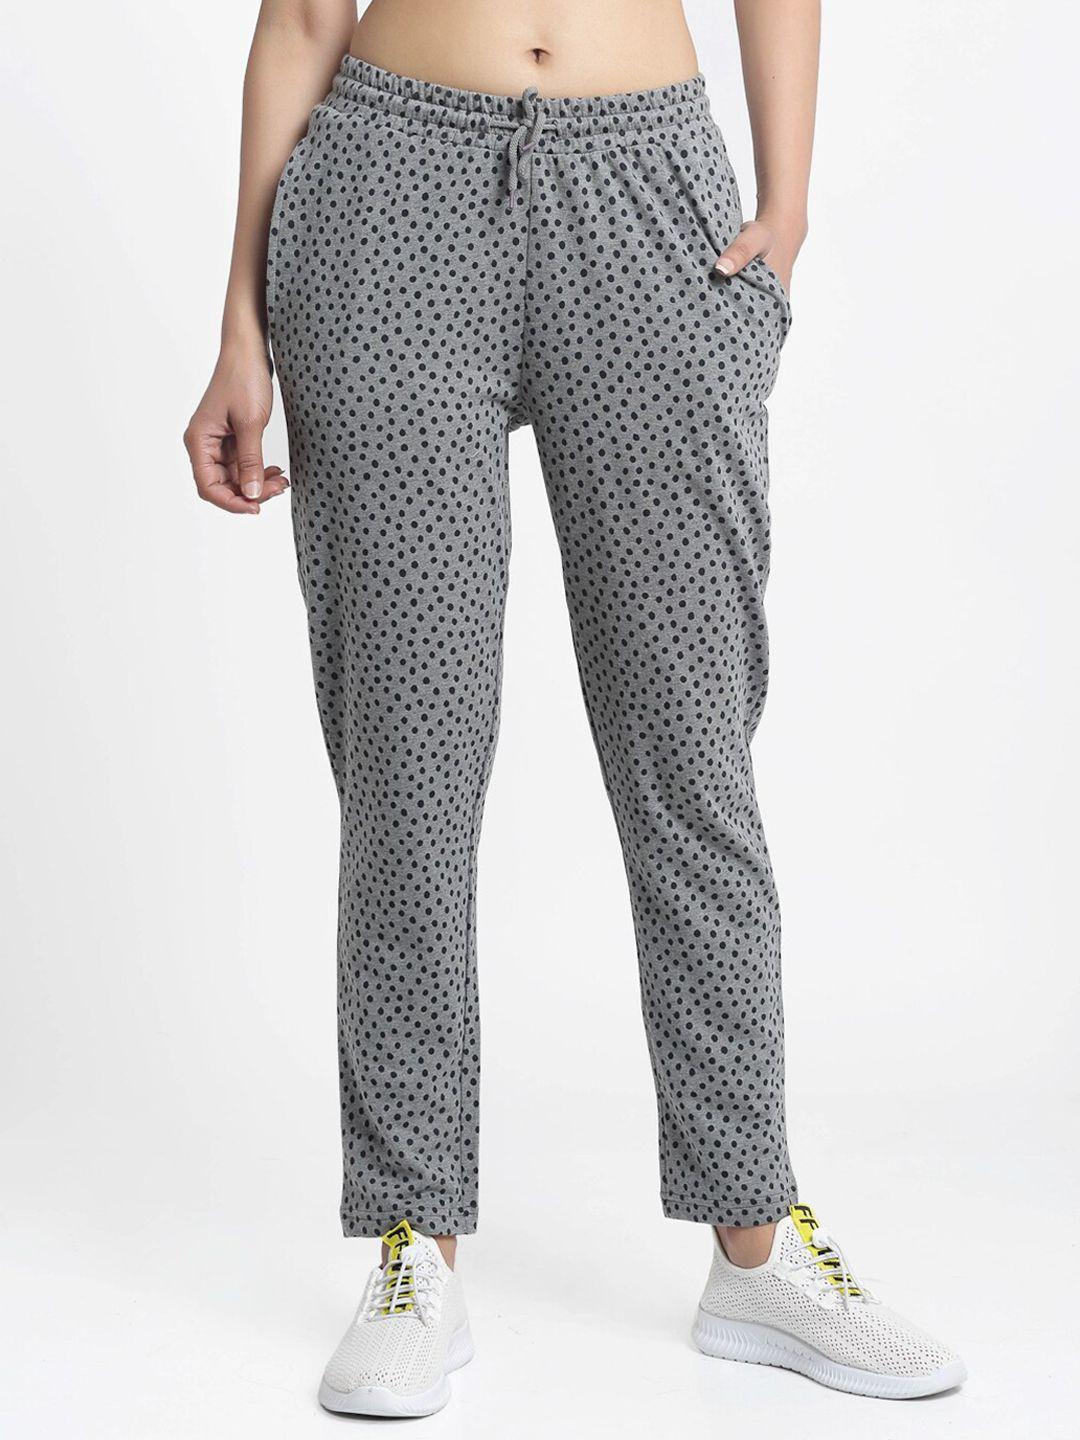 dressberry women grey polka dots printed relaxed fit track pant